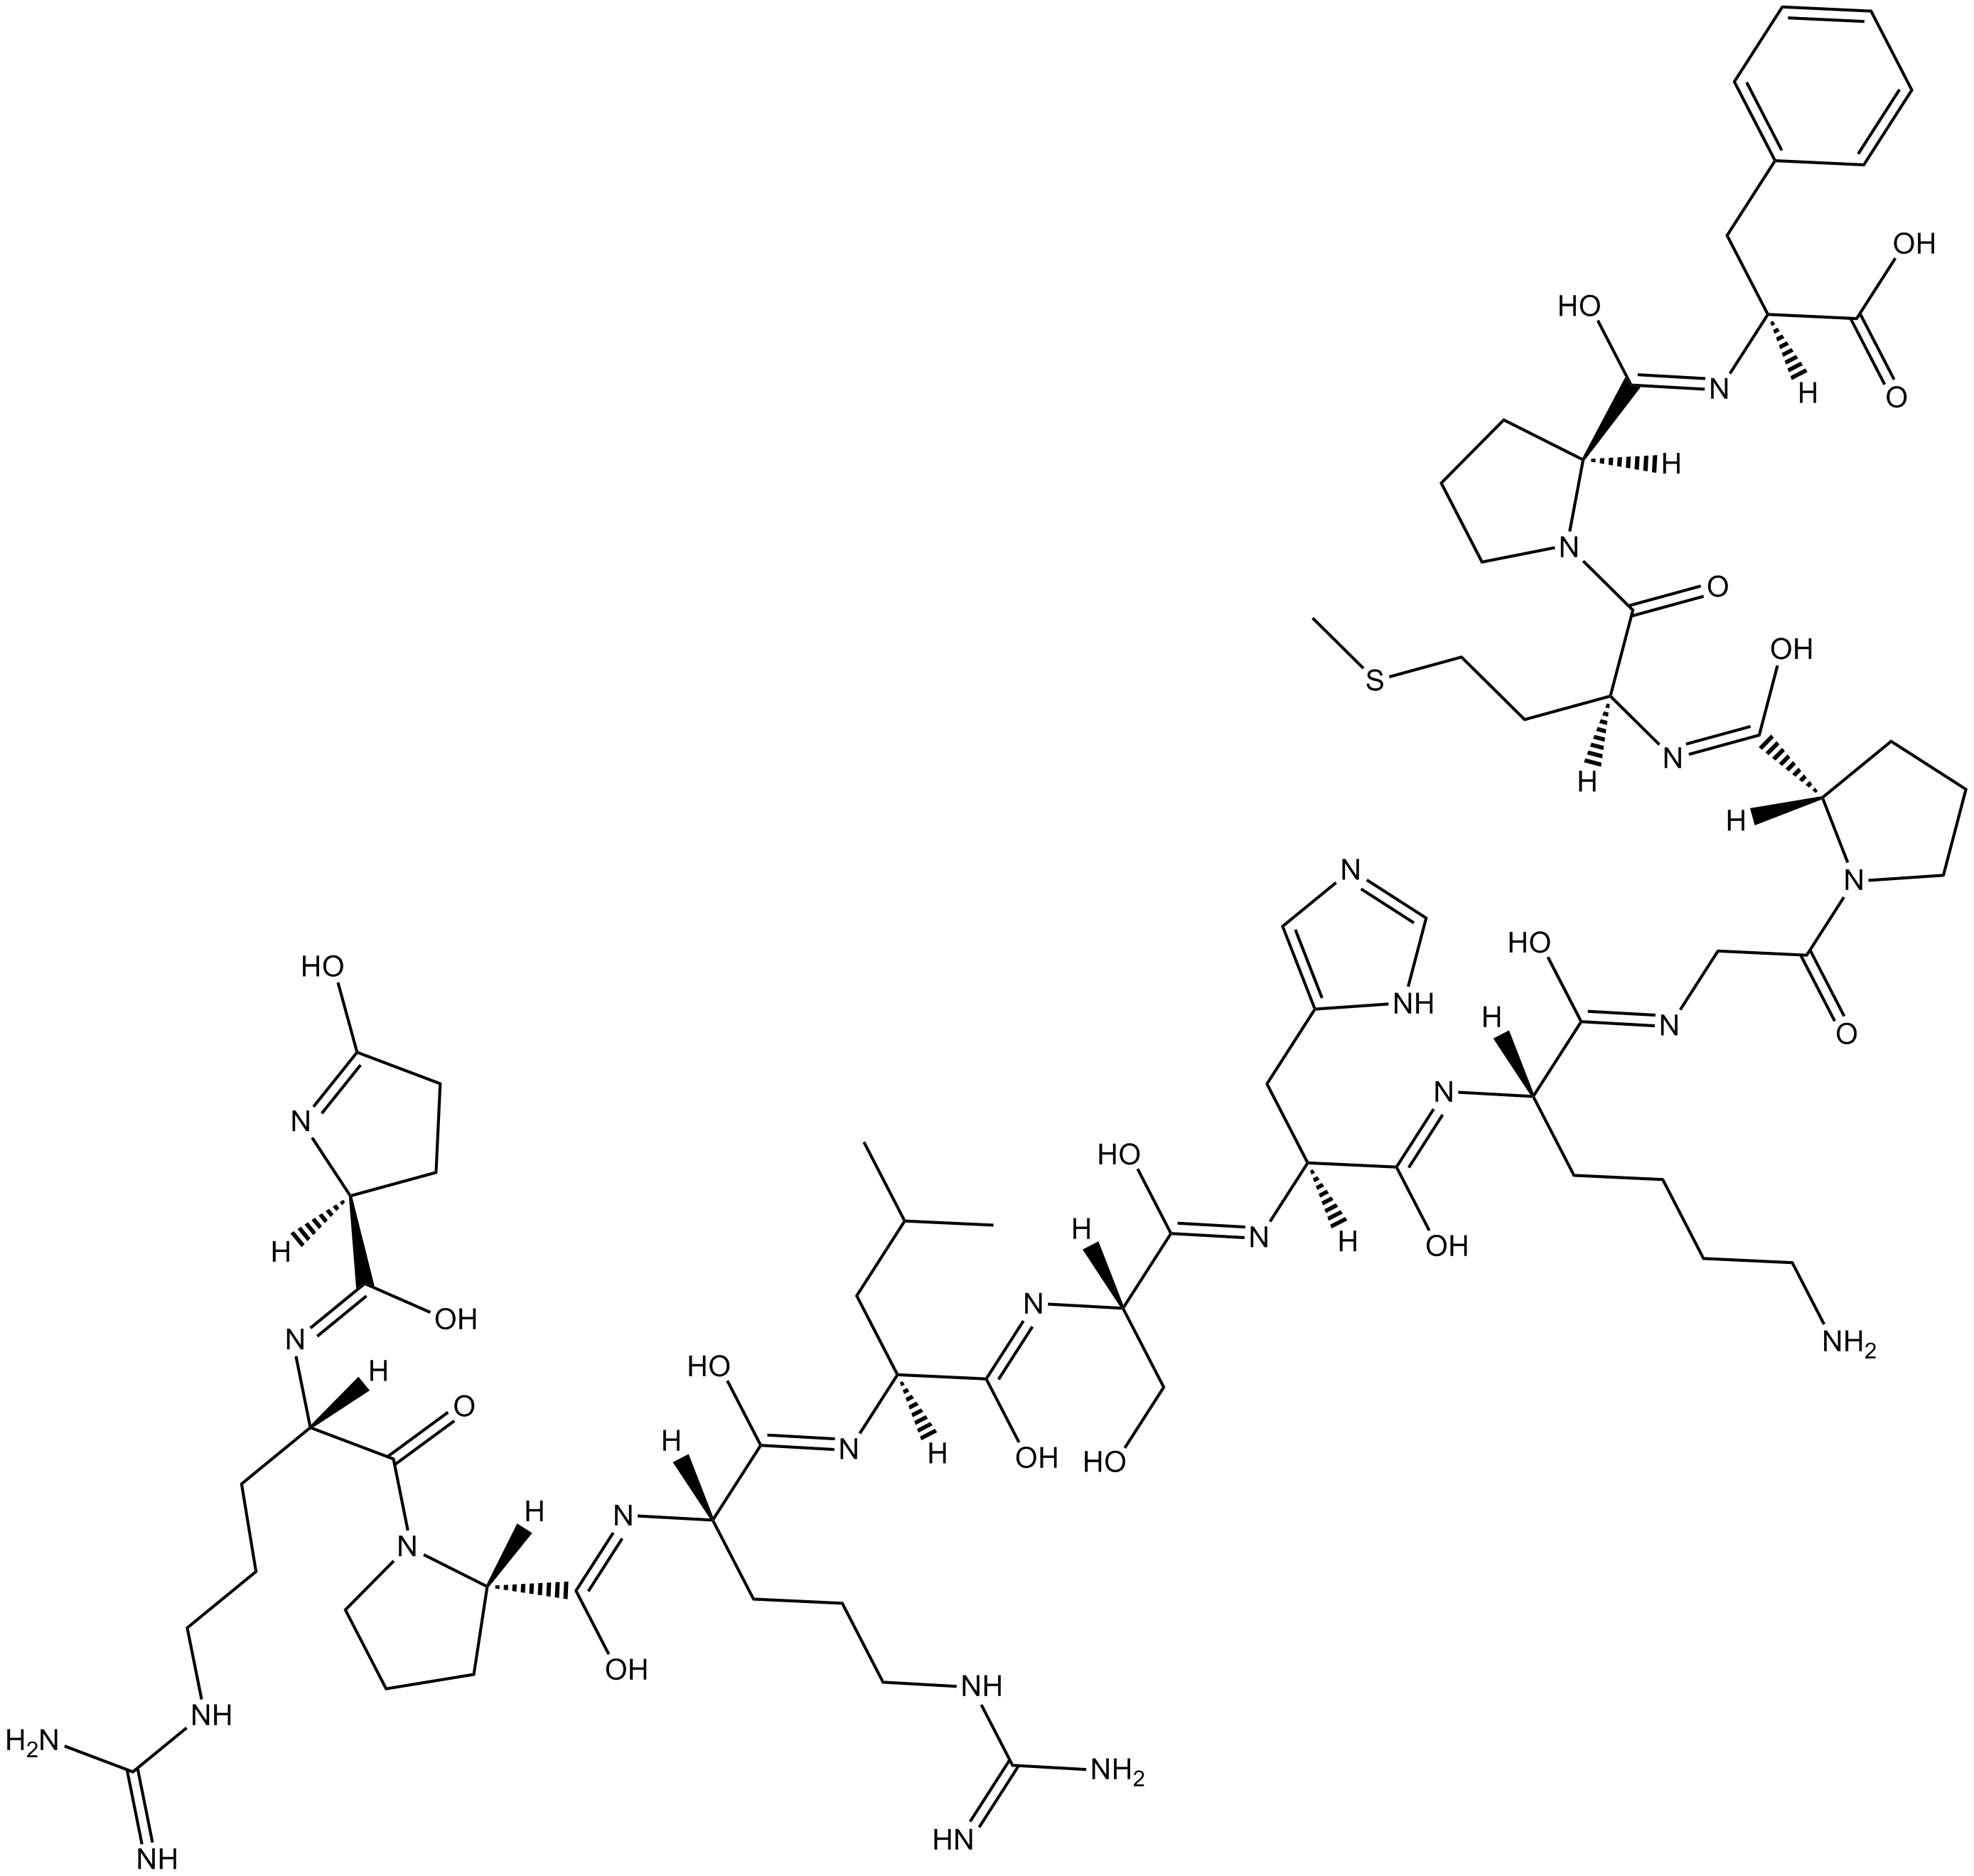 [Pyr1]-Apelin-13  Chemical Structure